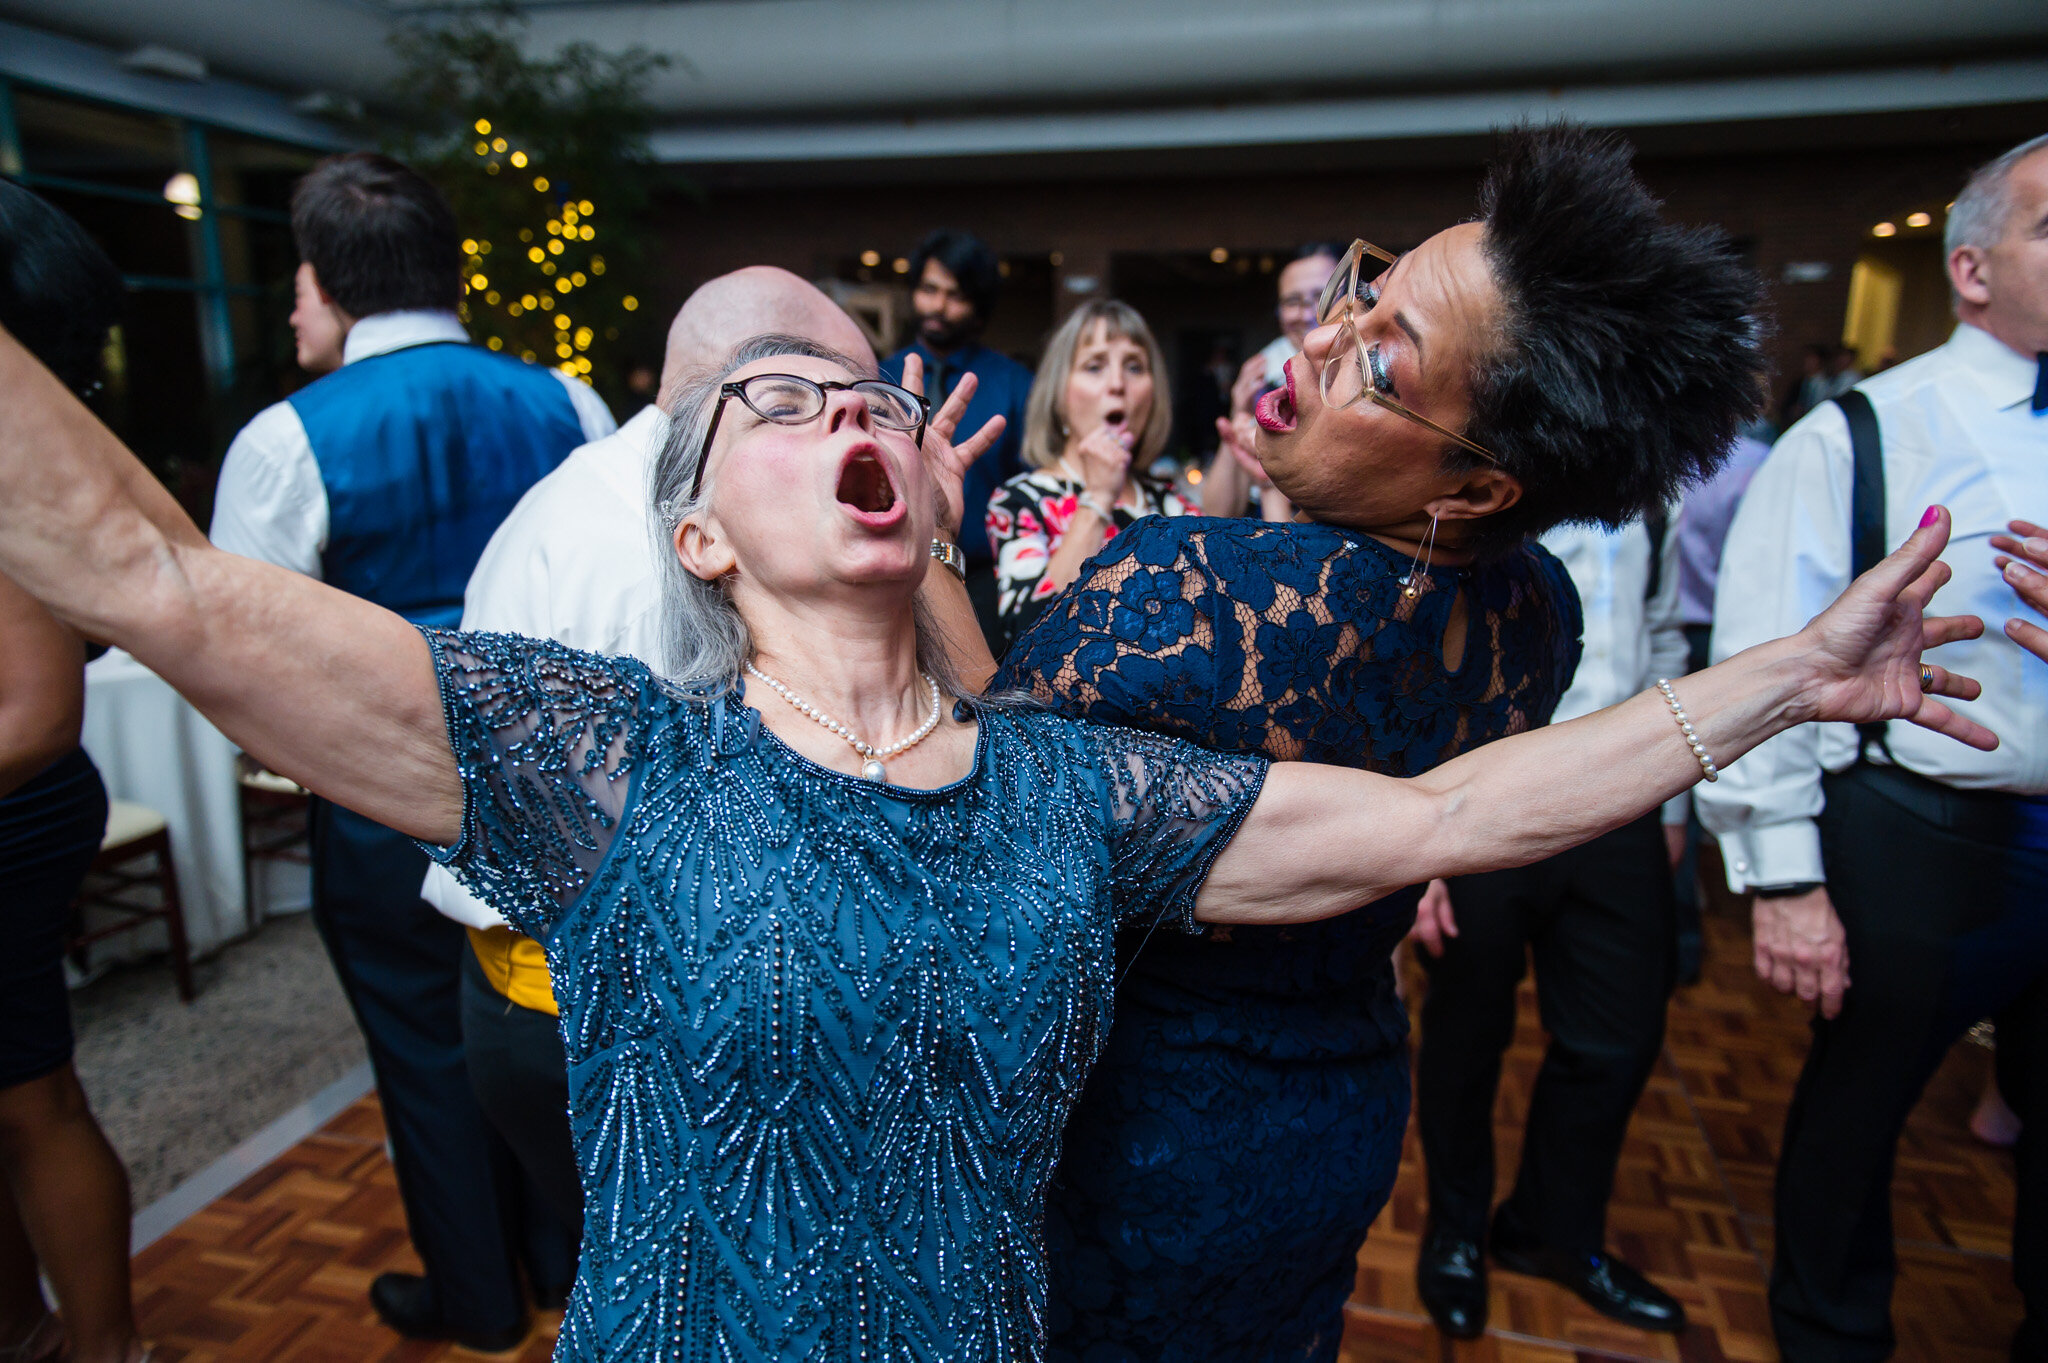 The mother-of-the-bride dancing at a wedding reception